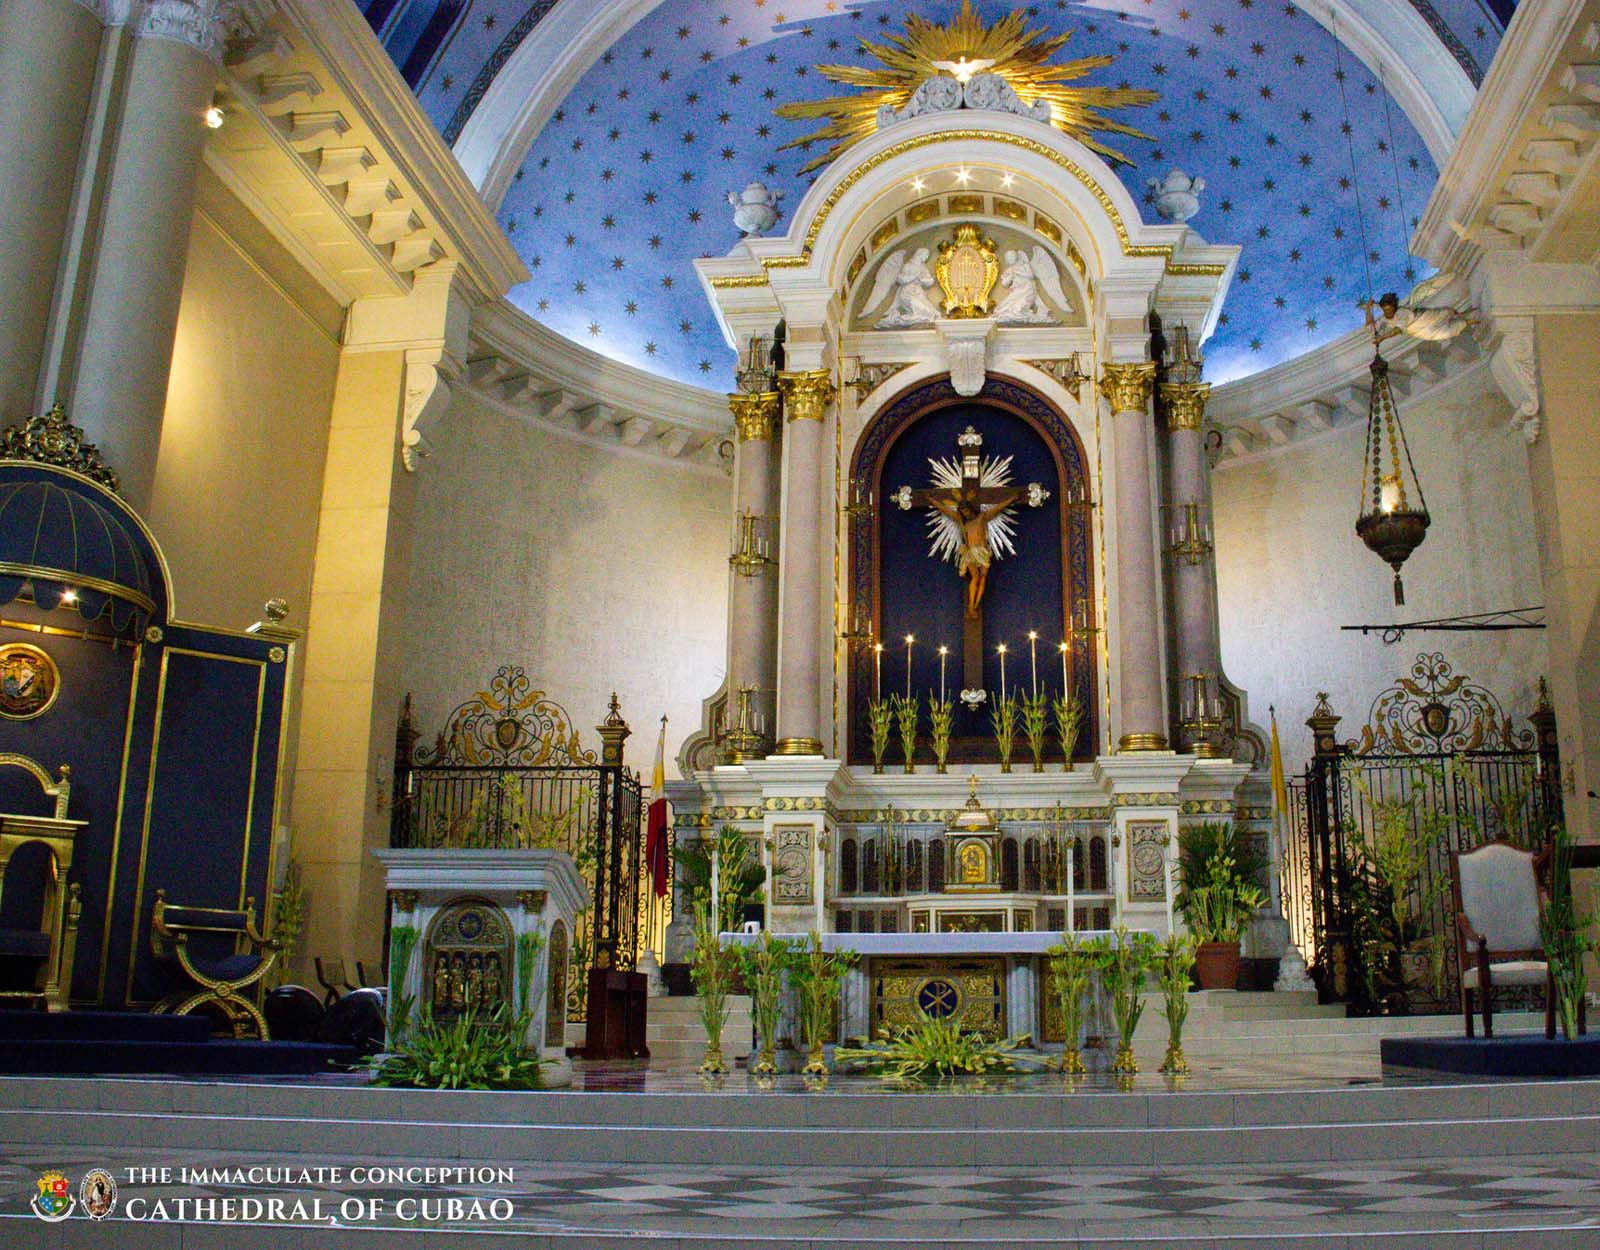 Visita Iglesia: The Immaculate Conception Cathedral of Cubao